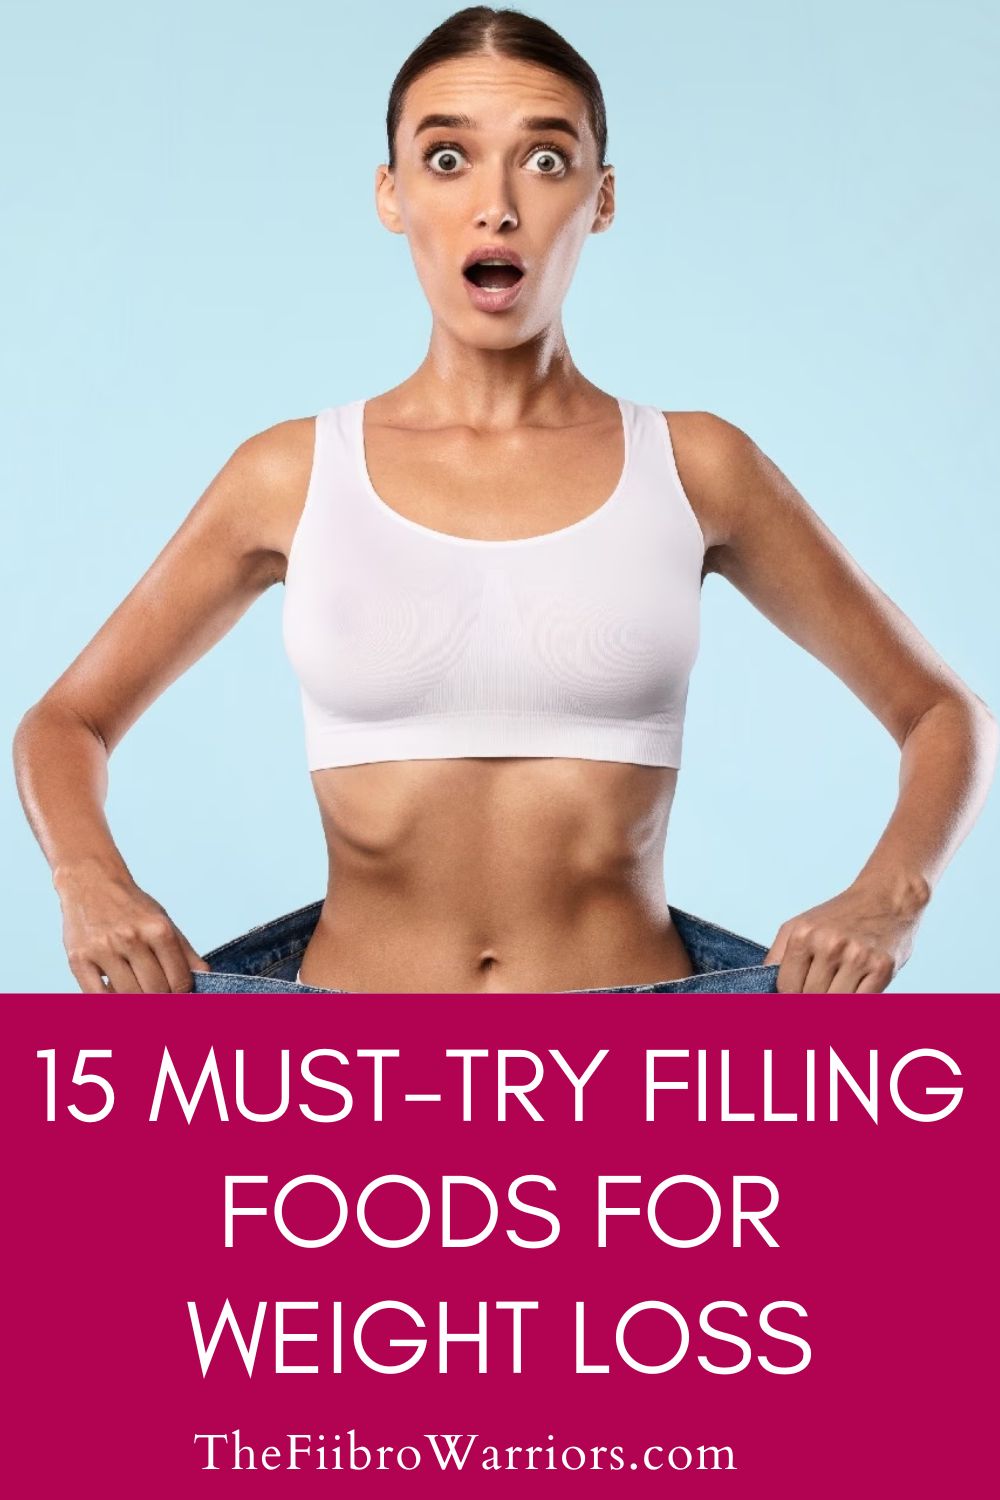 15 Must-Try Filling Foods for Weight Loss